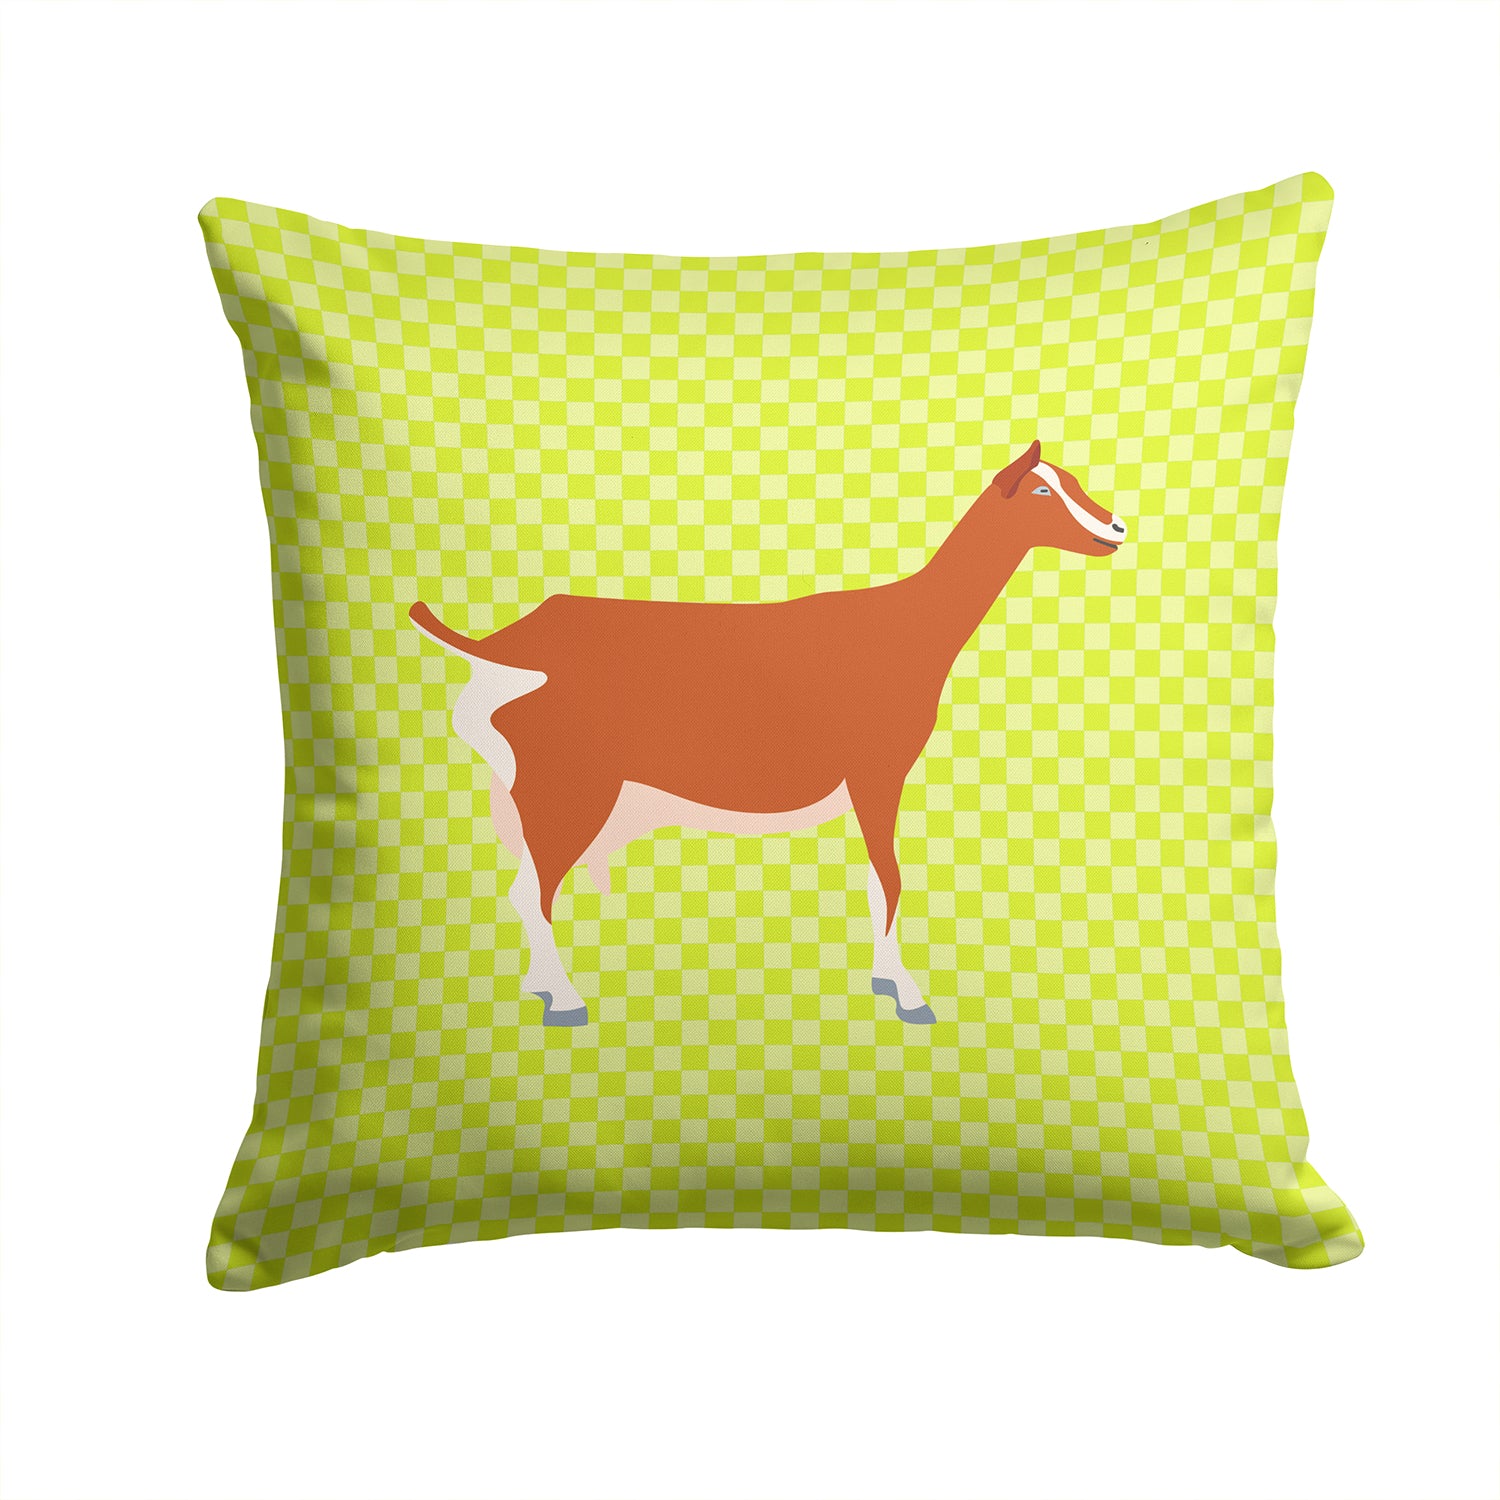 Toggenburger Goat Green Fabric Decorative Pillow BB7707PW1414 - the-store.com